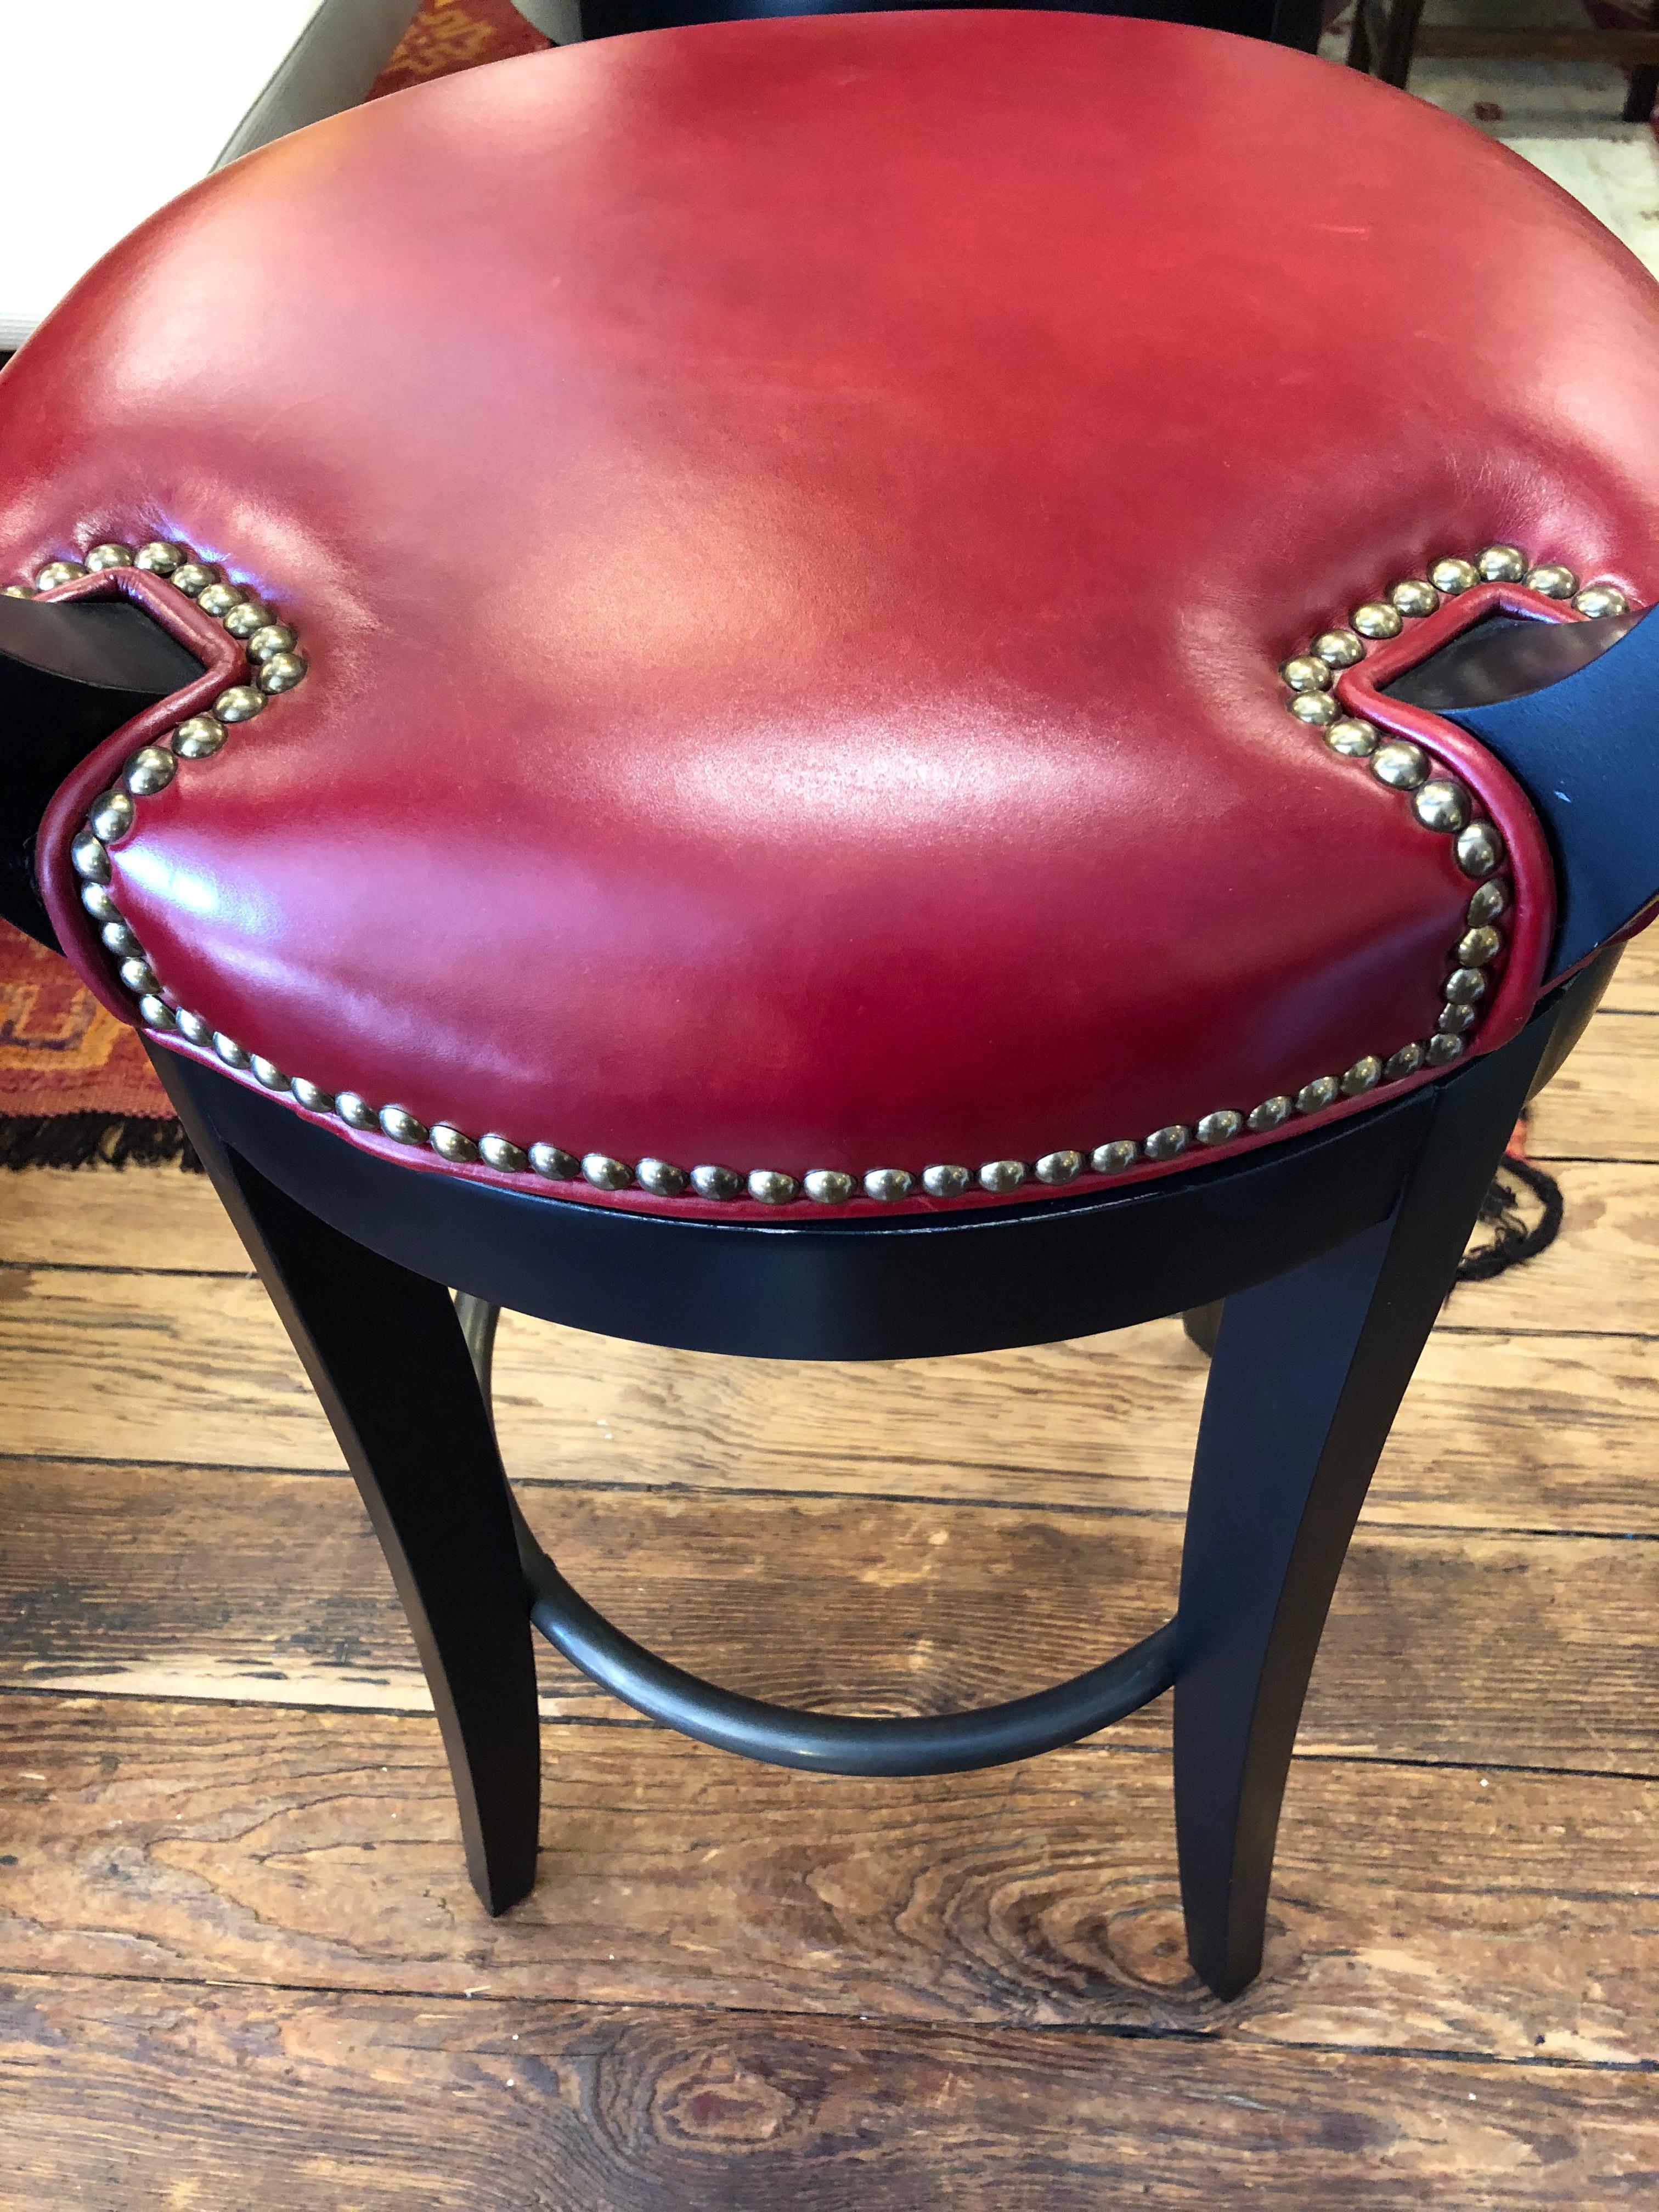 Super luxurious solid and comfortable set of 4 Vanguard Miles bar stools that are part of the Compendium Collection.  Wood is ebonized black and the seats are a plush red leather.  The foot rest is rubbed bronze finish on brass.  These were custom